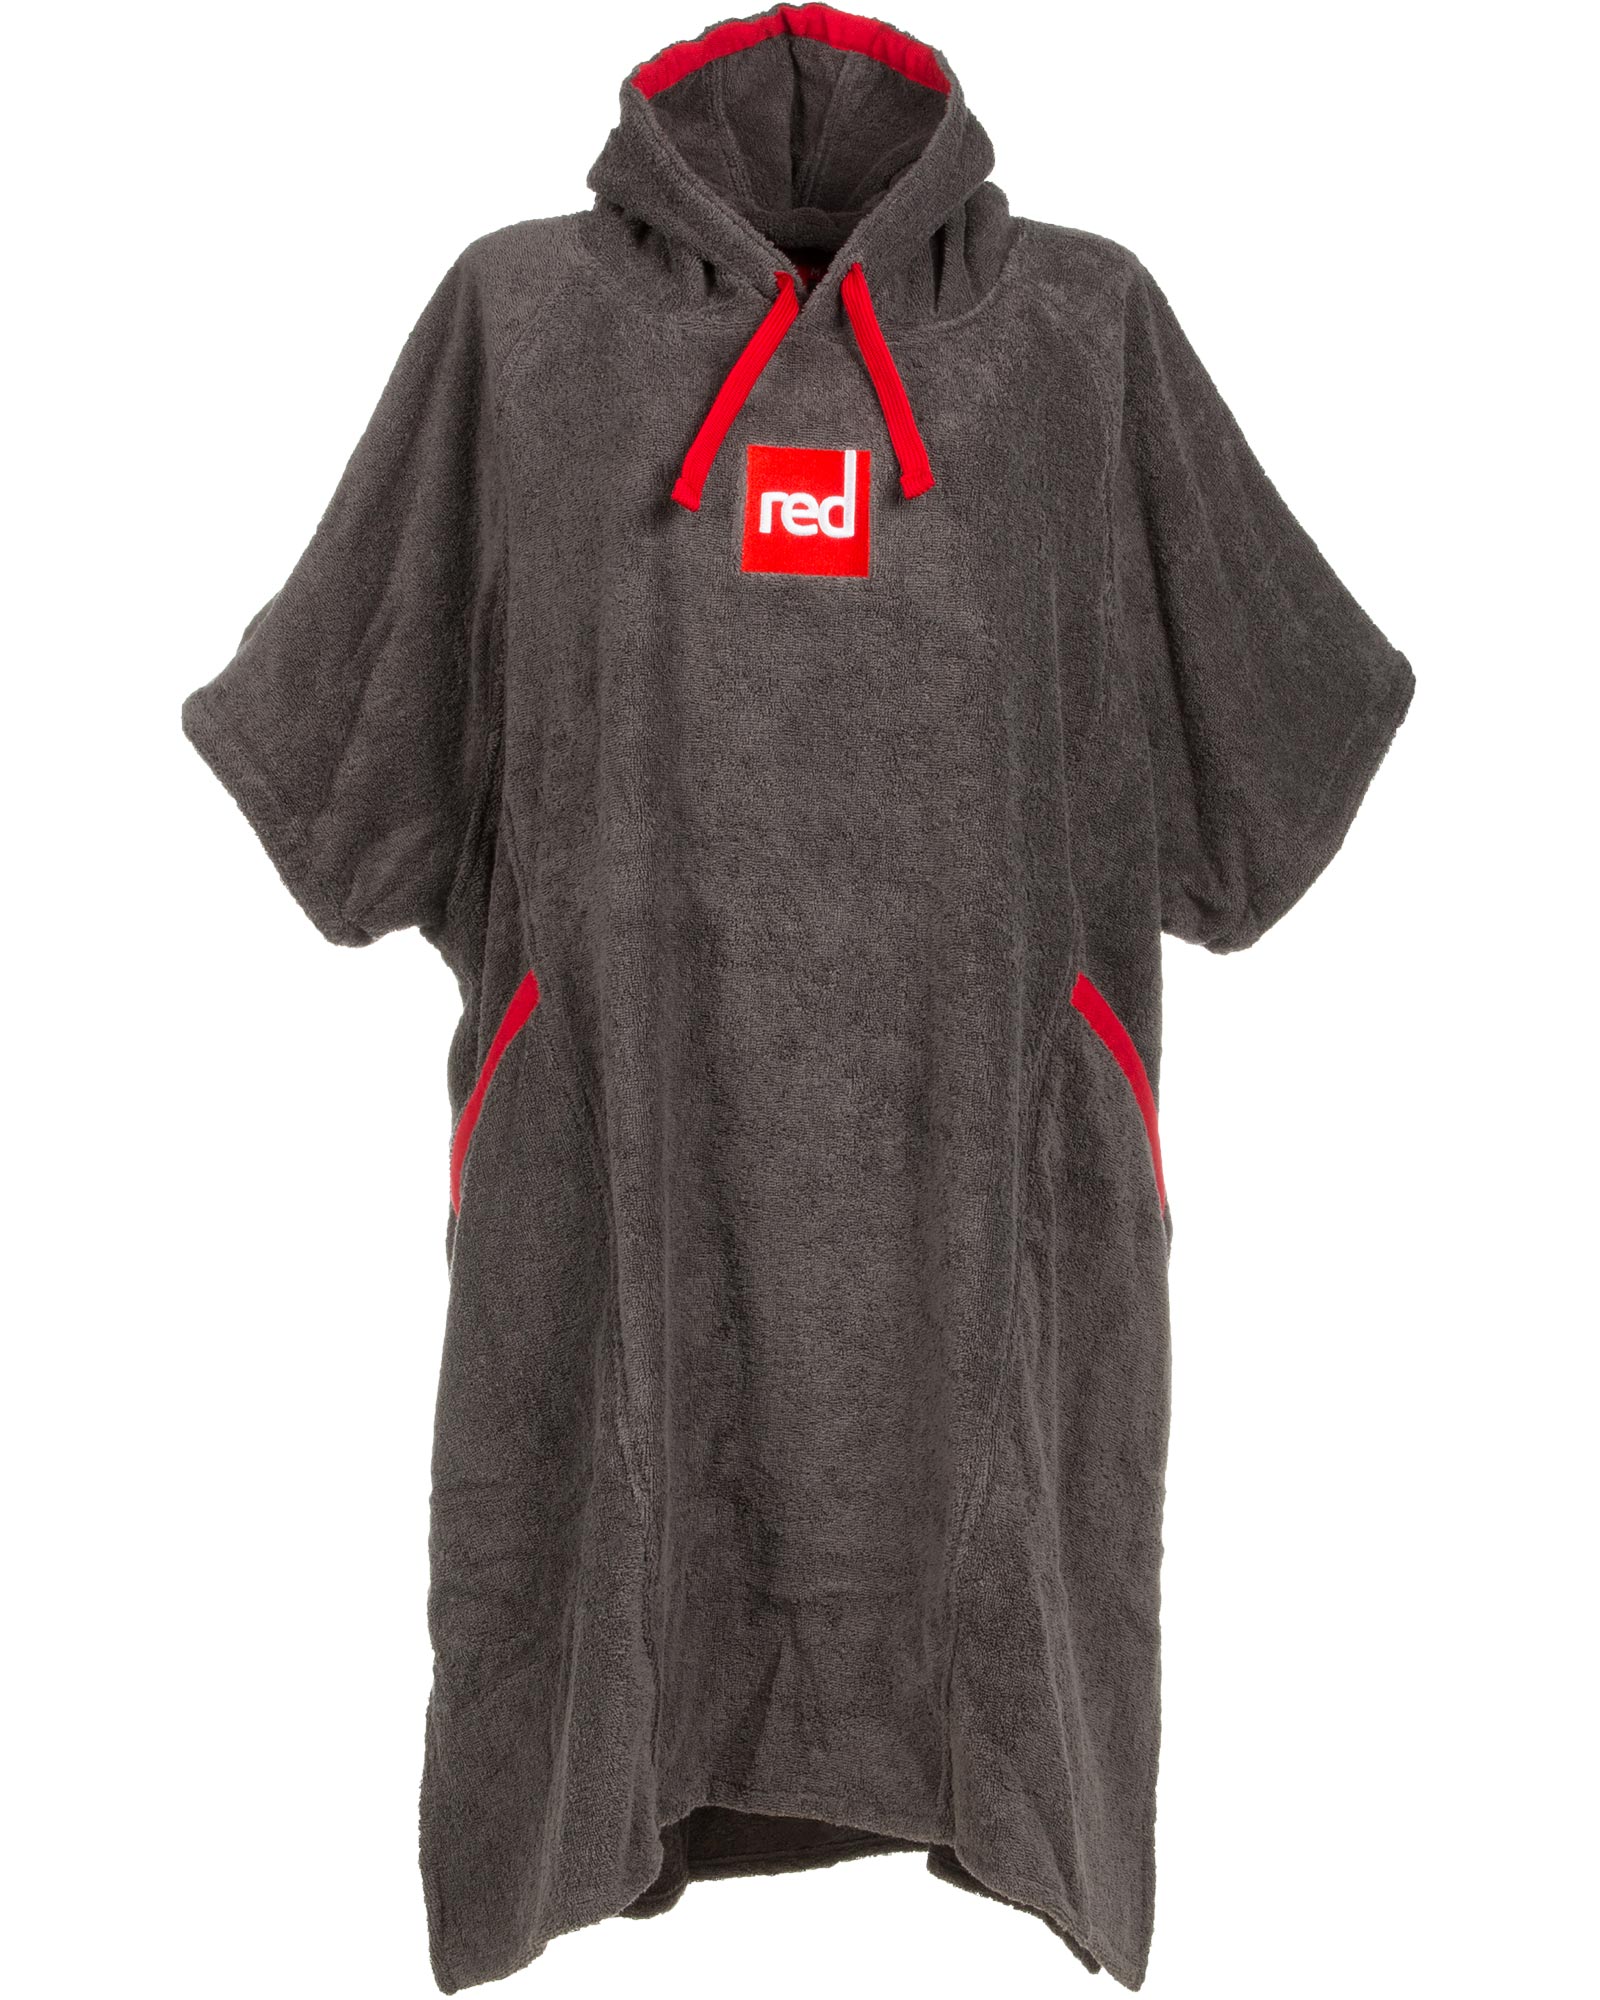 Red Kids’ Deluxe Towelling Changing Robe - Grey